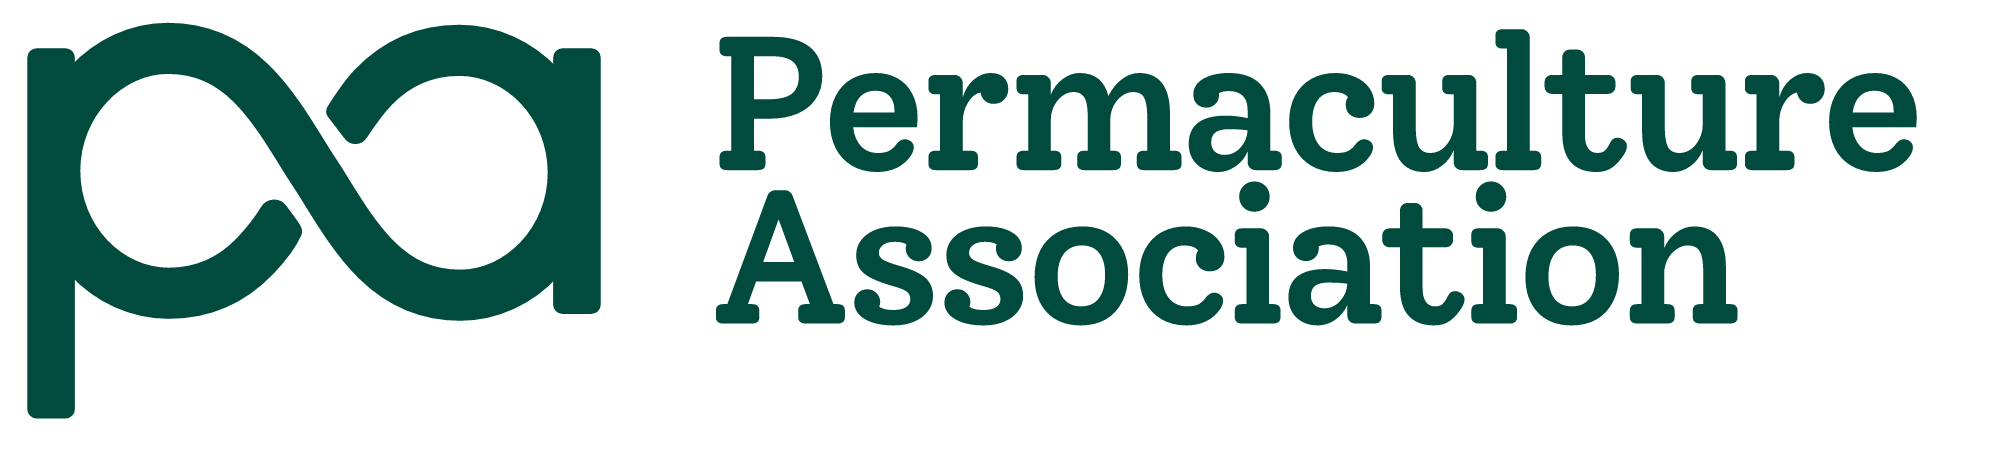 ACS is a Member of the Permaculture Association (membership number 14088).